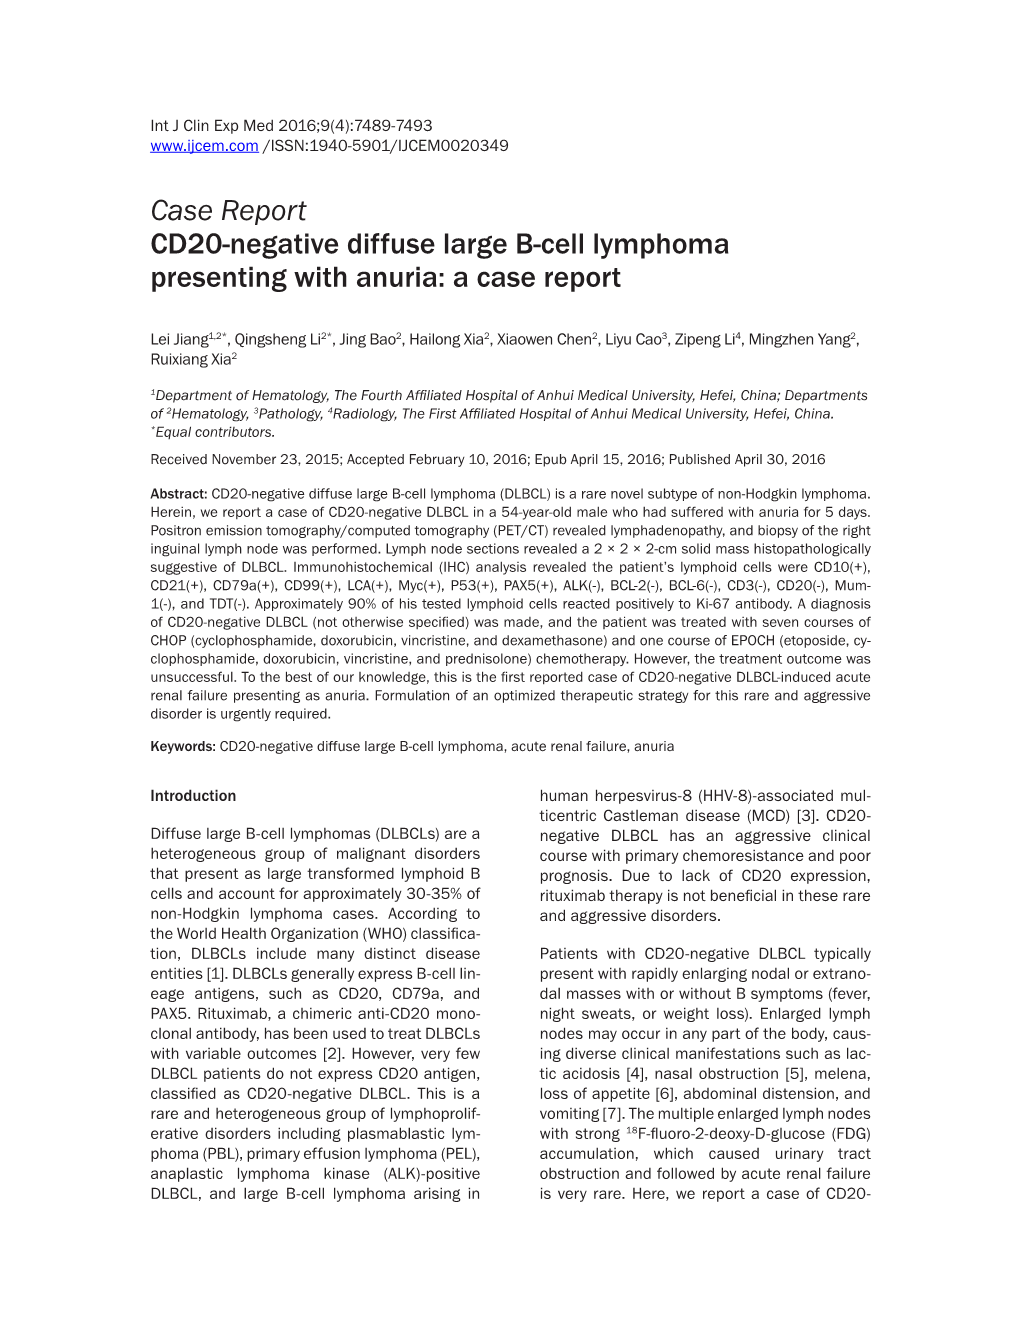 Case Report Cd20 Negative Diffuse Large B Cell Lymphoma Presenting With